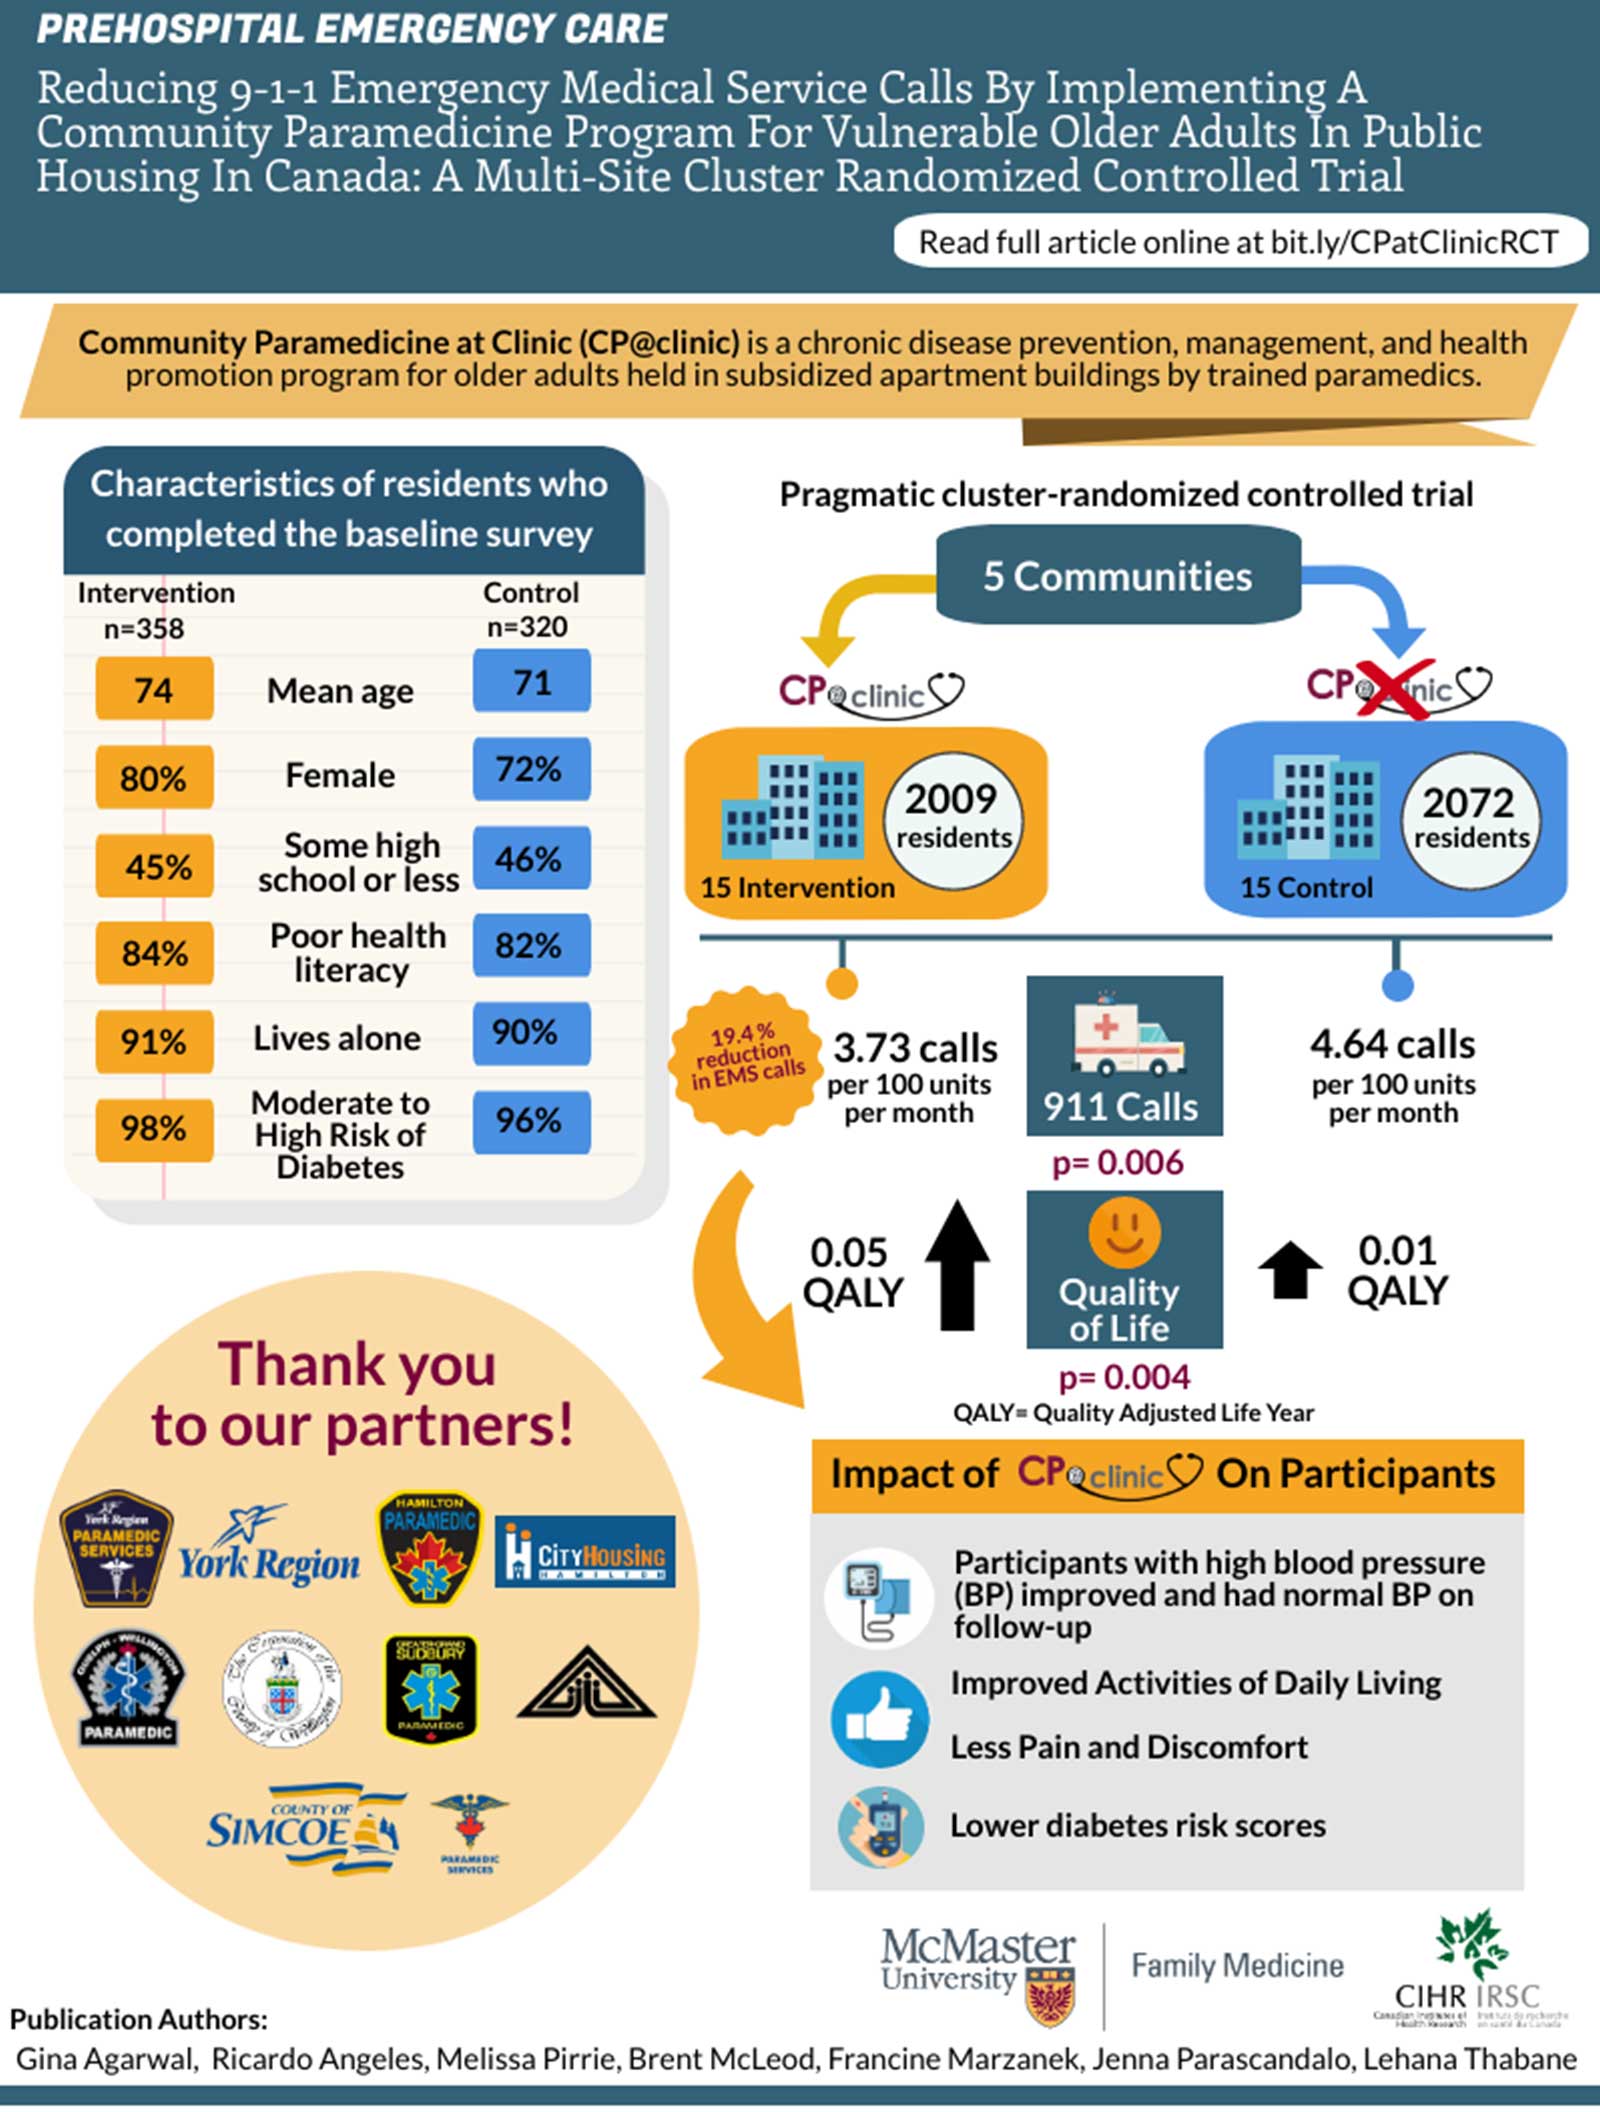 Infographic explaining the published article from the VIP Lab in Prehospital Emergency Care. The top banner has text that says Prehospital Emergency Care. Reducing 9 1 1 emergency medical service calls by implementing a community paramedicine program for vulnerable older adults in public housing in Canada. a multi site cluster randomized controlled trial. Read full article online at bit dot ly forward slash CP at Clinic RCT. Below the title banner is a smaller banner that has text which says Community Paramedicine at clinic or CP at clinic is a chronic disease prevention, management, and health promotion program for older adults held in subsidized apartment buildings by trained paramedics. Below this banner is a number of graphics and statistics. On the top left of that space below the banner is a box titled characteristics of residents who completed the baseline survey. On the left of the box is a column labelled Intervention n equals 358 and on the right is a column labelled Control n equals 320. The statistics organized in these columns are labelled as follows from top to bottom. Mean age is 74 in intervention, 71 in control. Female is 80 percent in intervention, 72 percent in control. Some high school or less is 45 percent in intervention, 46 percent in control. Poor health literacy is 84 percent in intervention, 82 percent in control. Lives alone is 91 percent in intervention, 90 percent in control. Moderate to high risk of diabetes is 98 percent in intervention, 96 percent in control. Below this box of characteristics is a bubble with text at the top of it that says thank you to our partners. Under the text are logos for the following services from left to right, top to bottom. York region paramedic services, York region, Hamilton paramedic services, city housing hamilton, guelph wellington paramedic services, the corporation of the county of wellington, greater Sudbury paramedic services, Sudbury housing, The County of Simcoe, and county of Simcoe health and emergency services. On the right side of the infographic is a diagram showing the flow of the project from study methods at the top to study results at the bottom. The top has text that says pragmatic cluster randomized controlled trial. Below this is a box that says 5 communities and has two arrows branching away from it. One arrow branches to the left and down, and the other branches to the right and down. The arrow on the left points to the CP at clinic logo, an icon of apartment buildings, and text that says 15 intervention, 2009 residents. The arrow on the right points to the CP at clinic logo with an X overlaying it, an icon of apartment buildings, and text that says 15 control, 2072 residents. Below all these icons and text is a horizontal line with a vertical branch pointing down from the text that says 15 intervention, and a vertical branch pointing down from the text that says 15 control. Below the branch from 15 intervention there is a bubble that says 19.4 percent reduction in EMS calls and text that says 3.73 calls per 100 units per month. Below the branch from 15 control is text that says 4.64 calls per 100 units per month. Between the two branches is an icon of an ambulance with text that says 911 calls and text that says p equals 0.006. Below the text that says 3.73 calls per 100 units per month is text that says 0.05 QALY and an icon of an arrow pointing up. Below the text that says 4.64 calls per 100 units per month is text that says 0.01 QALY and an icon of a smaller arrow pointing up. Between the two arrows pointing up is a smiley icon with text that says quality of life and text that says p equals 0.004. Below that is text that says QALY equals Quality adjusted life year. There is a large arrow pointing from the bubble that says 19.4 percent reduction in EMS calls to a box that is titled Impact of CP at clinic on participants. In the box there is an icon of a blood pressure cuff and text that says participants with high blood pressure or BP improved and had normal BP on follow up, a thumbs up icon with text that says improved activities of daily living, less pain and discomfort, and an icon of a hand holding a handheld glucometer with text that says lower diabetes risk scores. Below this box is the logo for the McMaster University Department of Family Medicine and the logo for the Canadian Institute of Health Research. The bottom of the infographic has text that says Publication authors which are Gina Agarwal, Ricardo Angeles, Melissa Pirrie, Brent McLeod, Francine Marzanek, Jenna Parascandalo, Lehana Thabane.